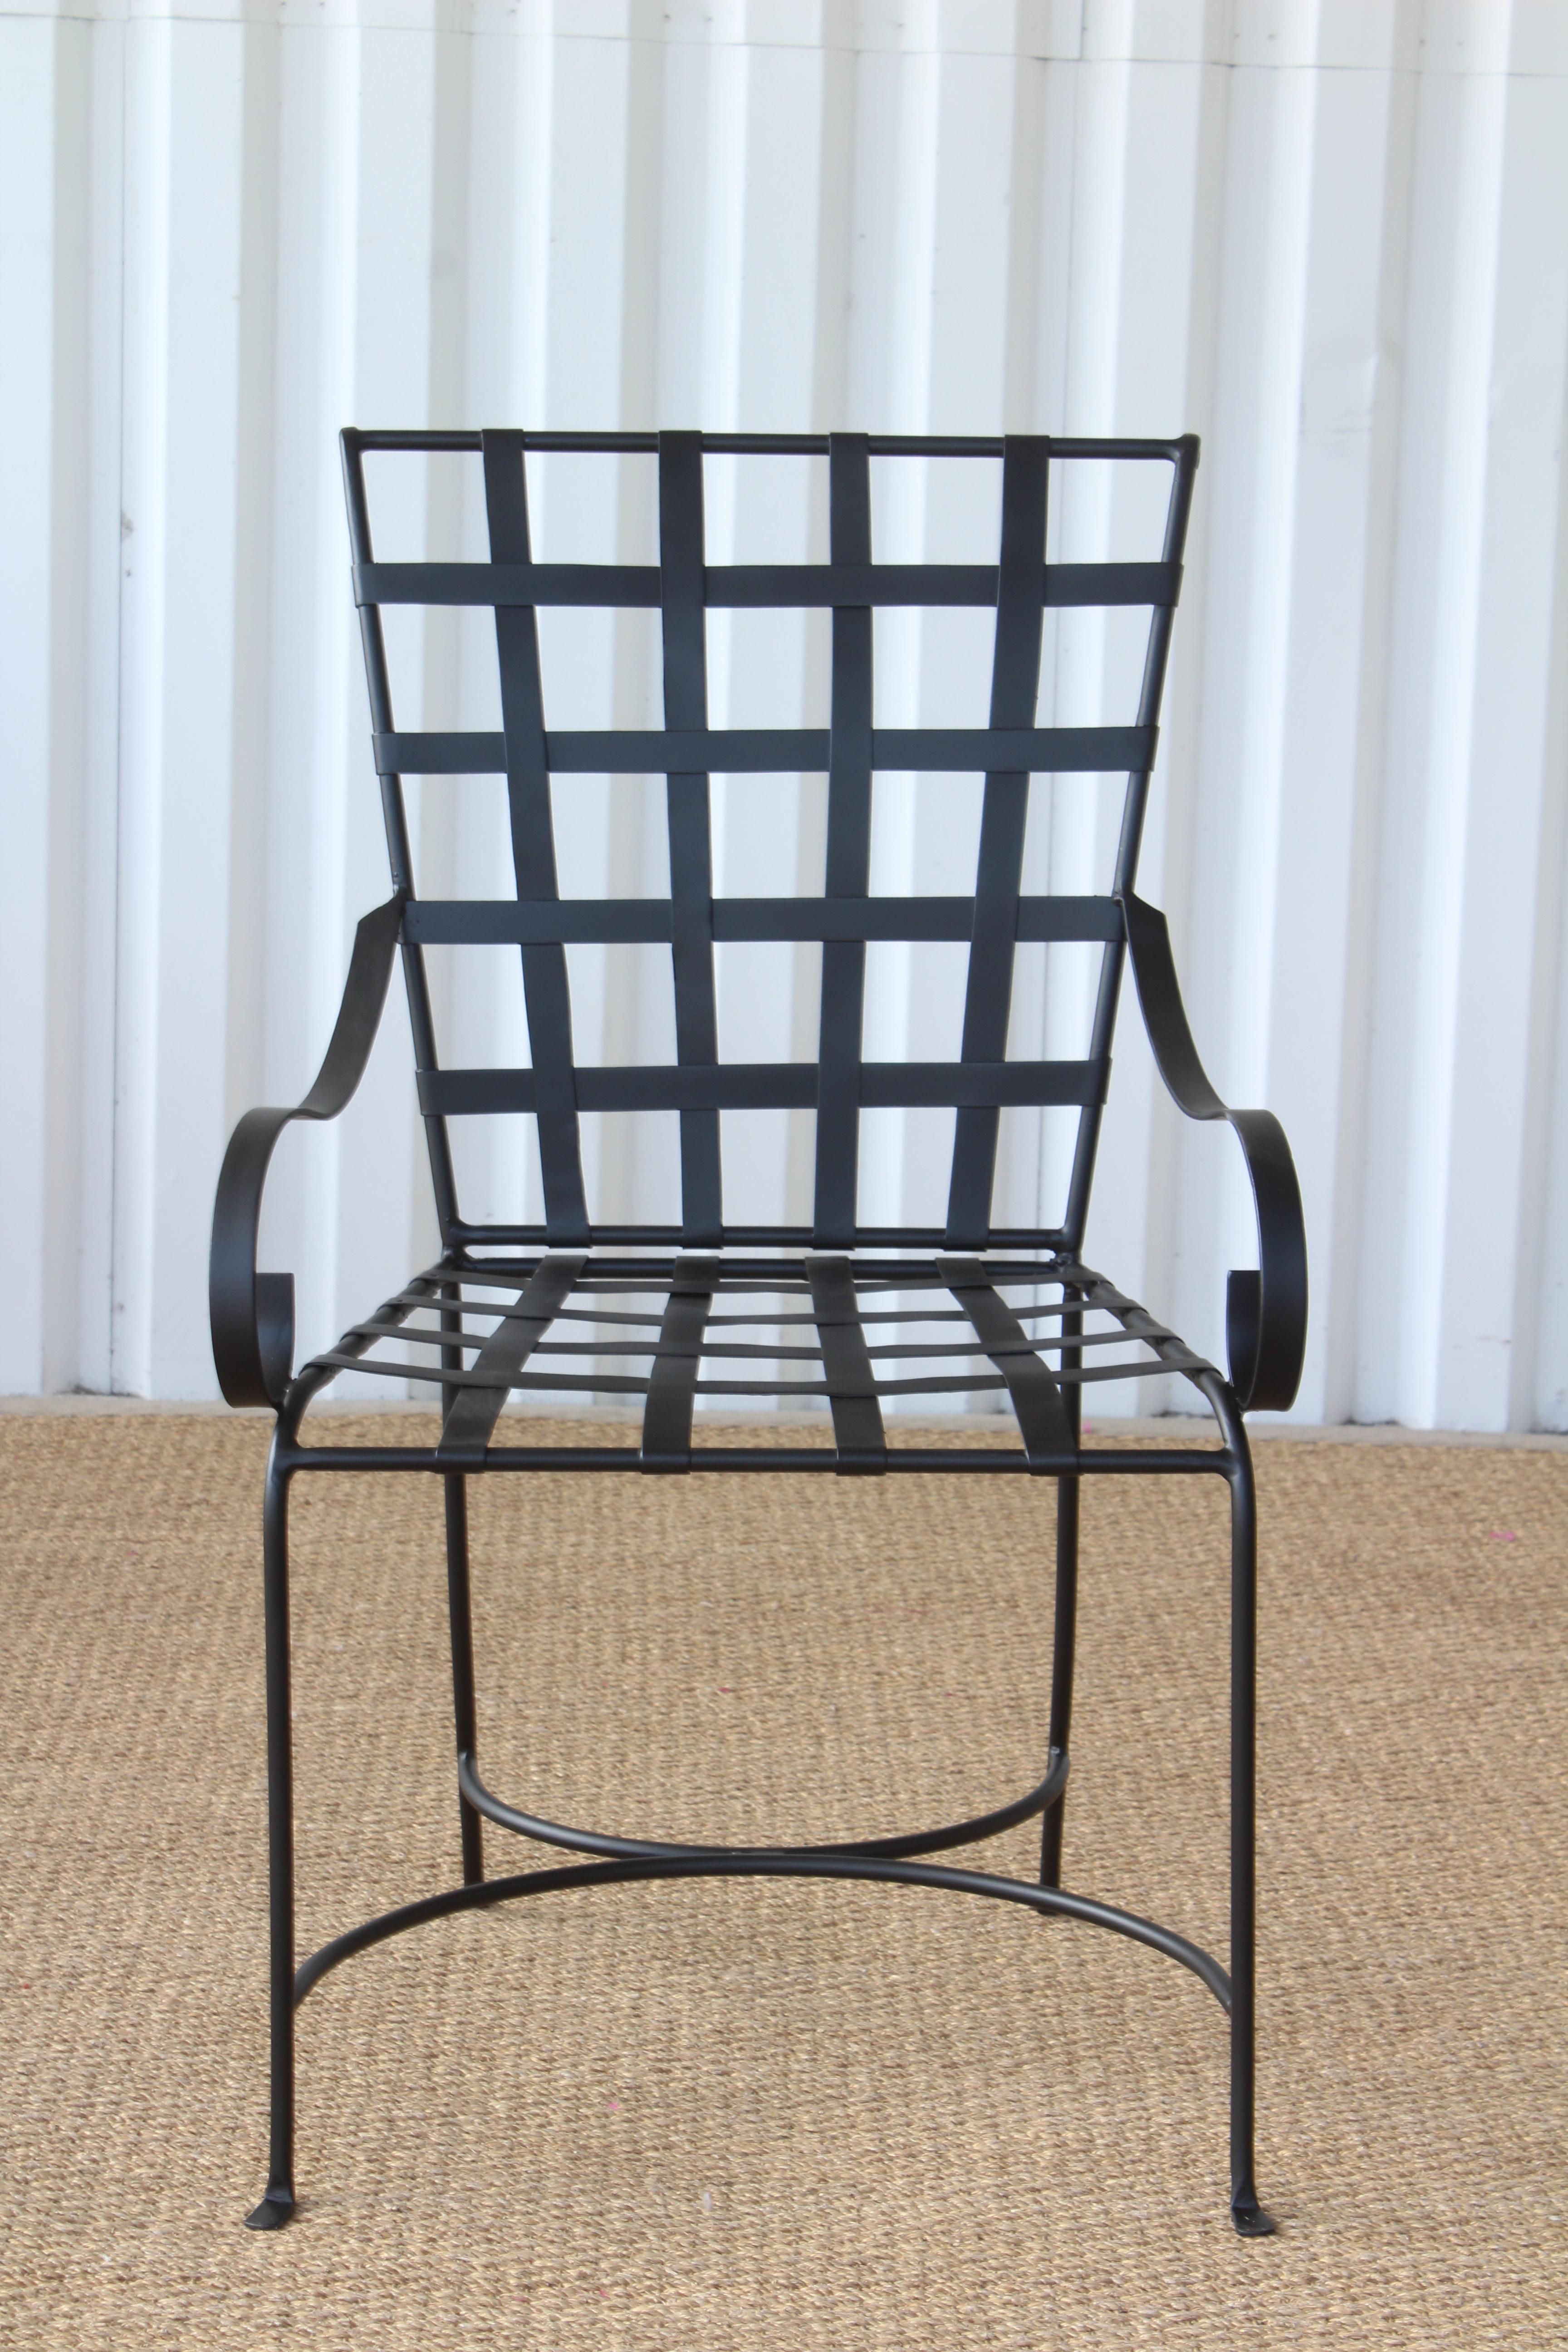 Set of twelve vintage iron garden chairs, Italy, 1950s. In the style of Mario Papperzini for Salterini. The set has been restored with new black powder coating. Excellent condition. Sold as a set of twelve.